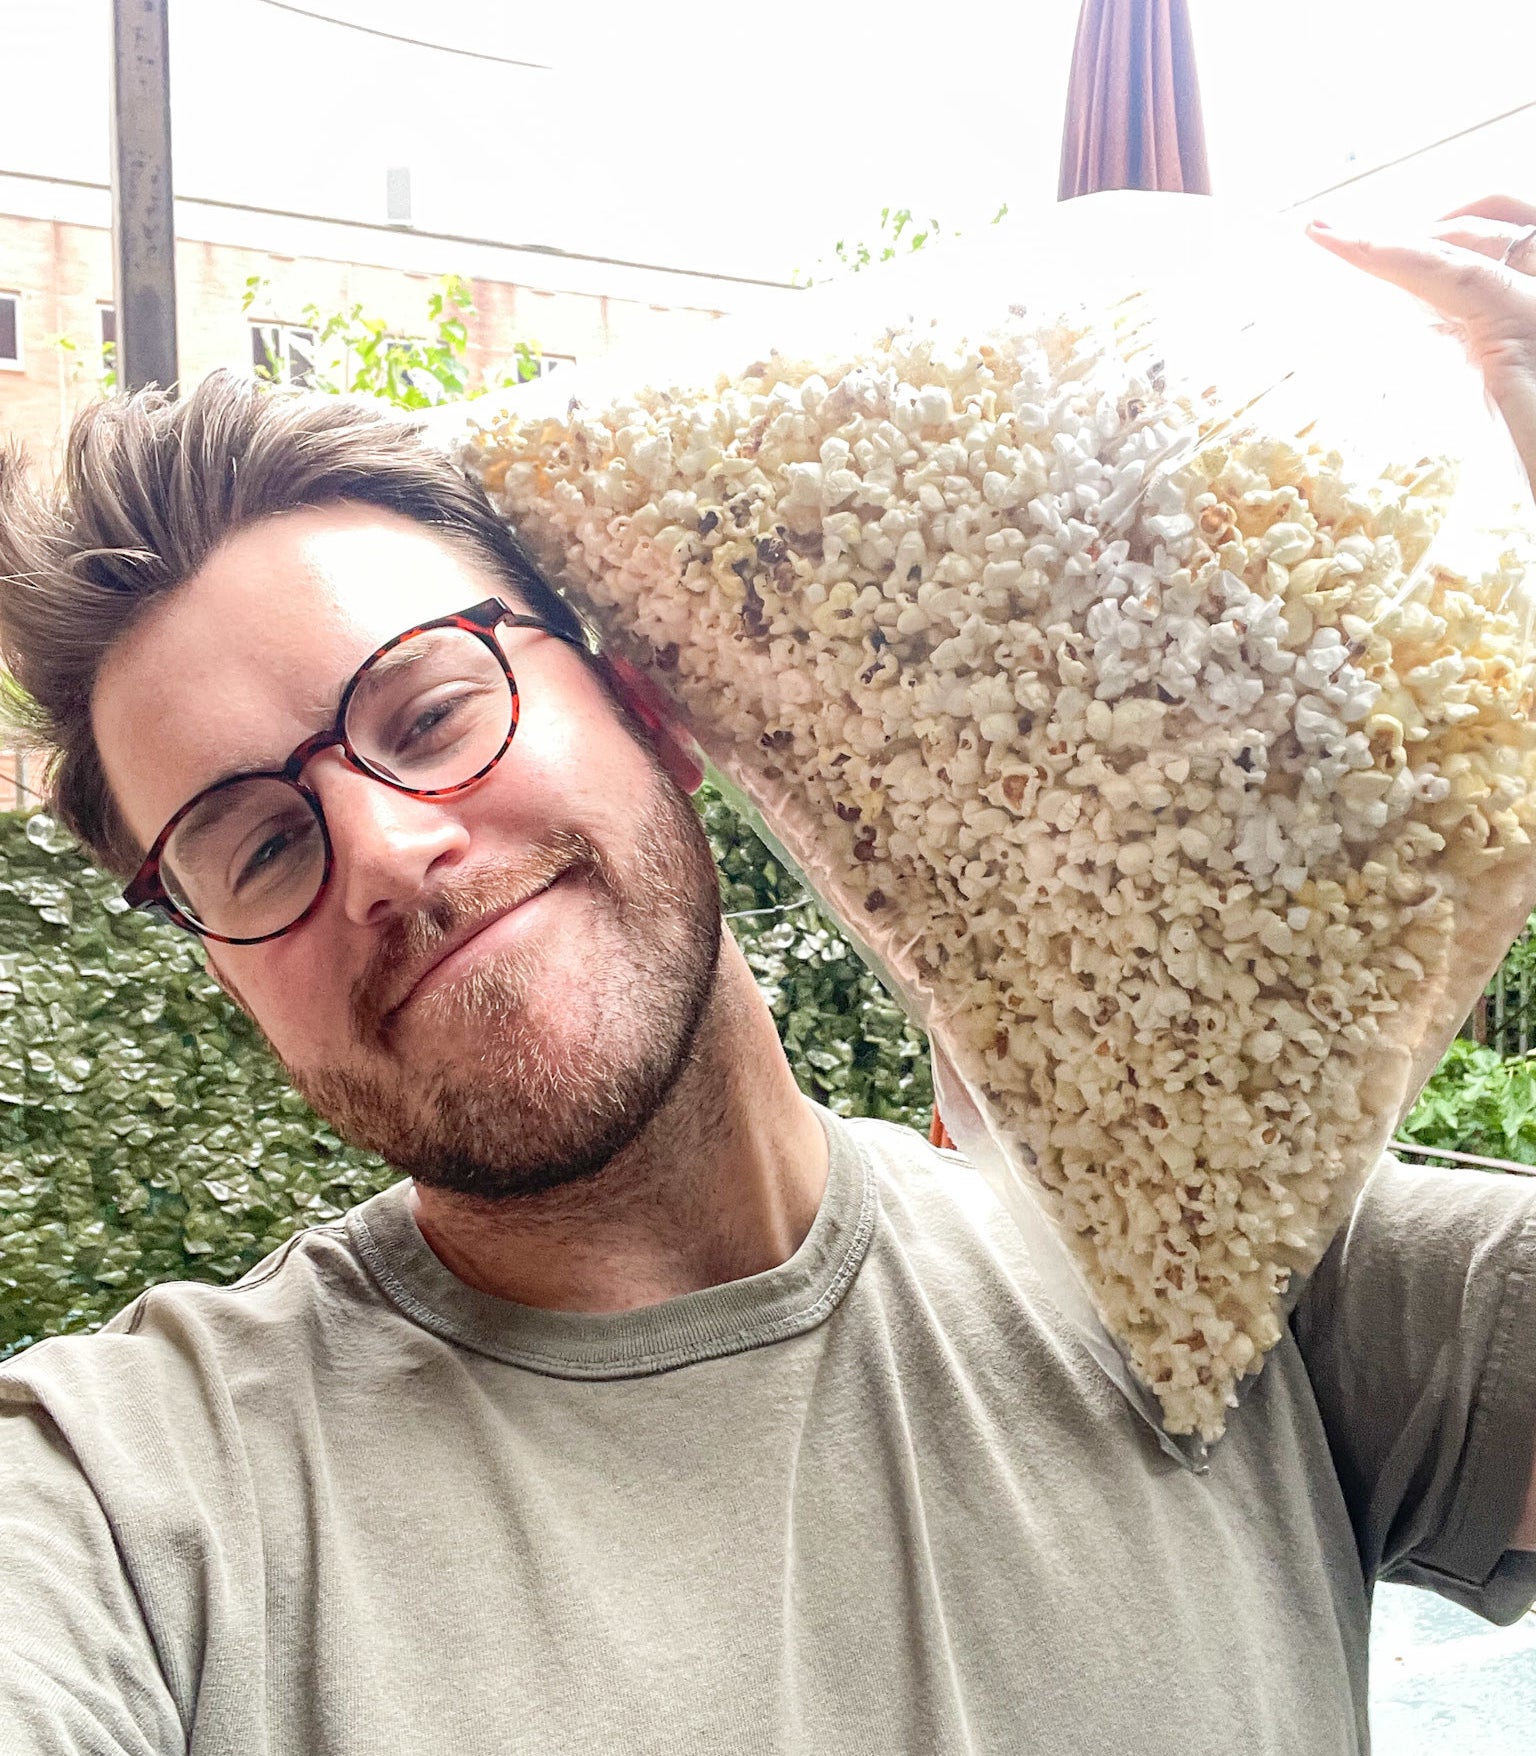 the author holding a large bag of popcorn